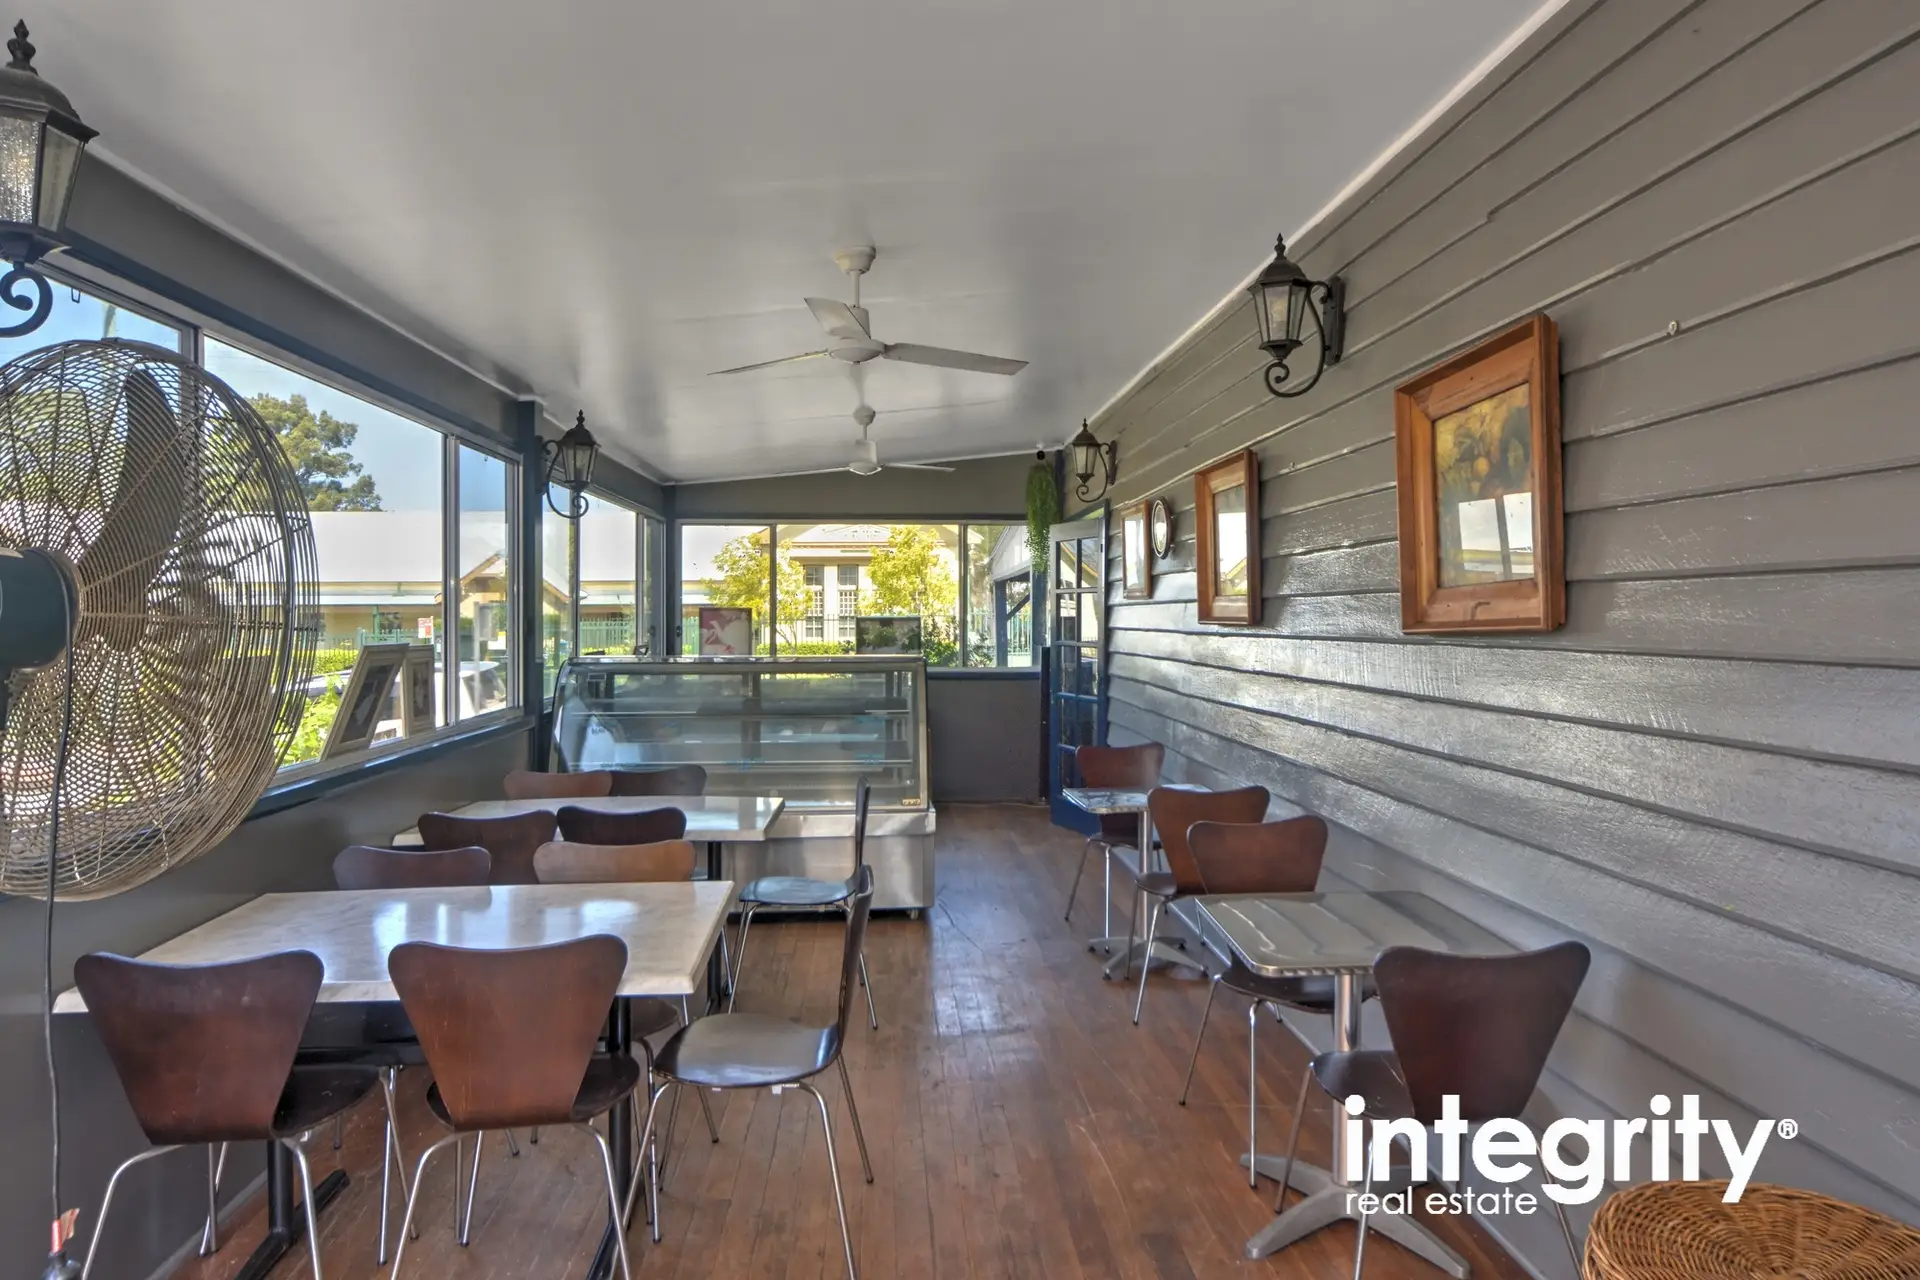 71 Plunkett Street, Nowra For Sale by Integrity Real Estate - image 3